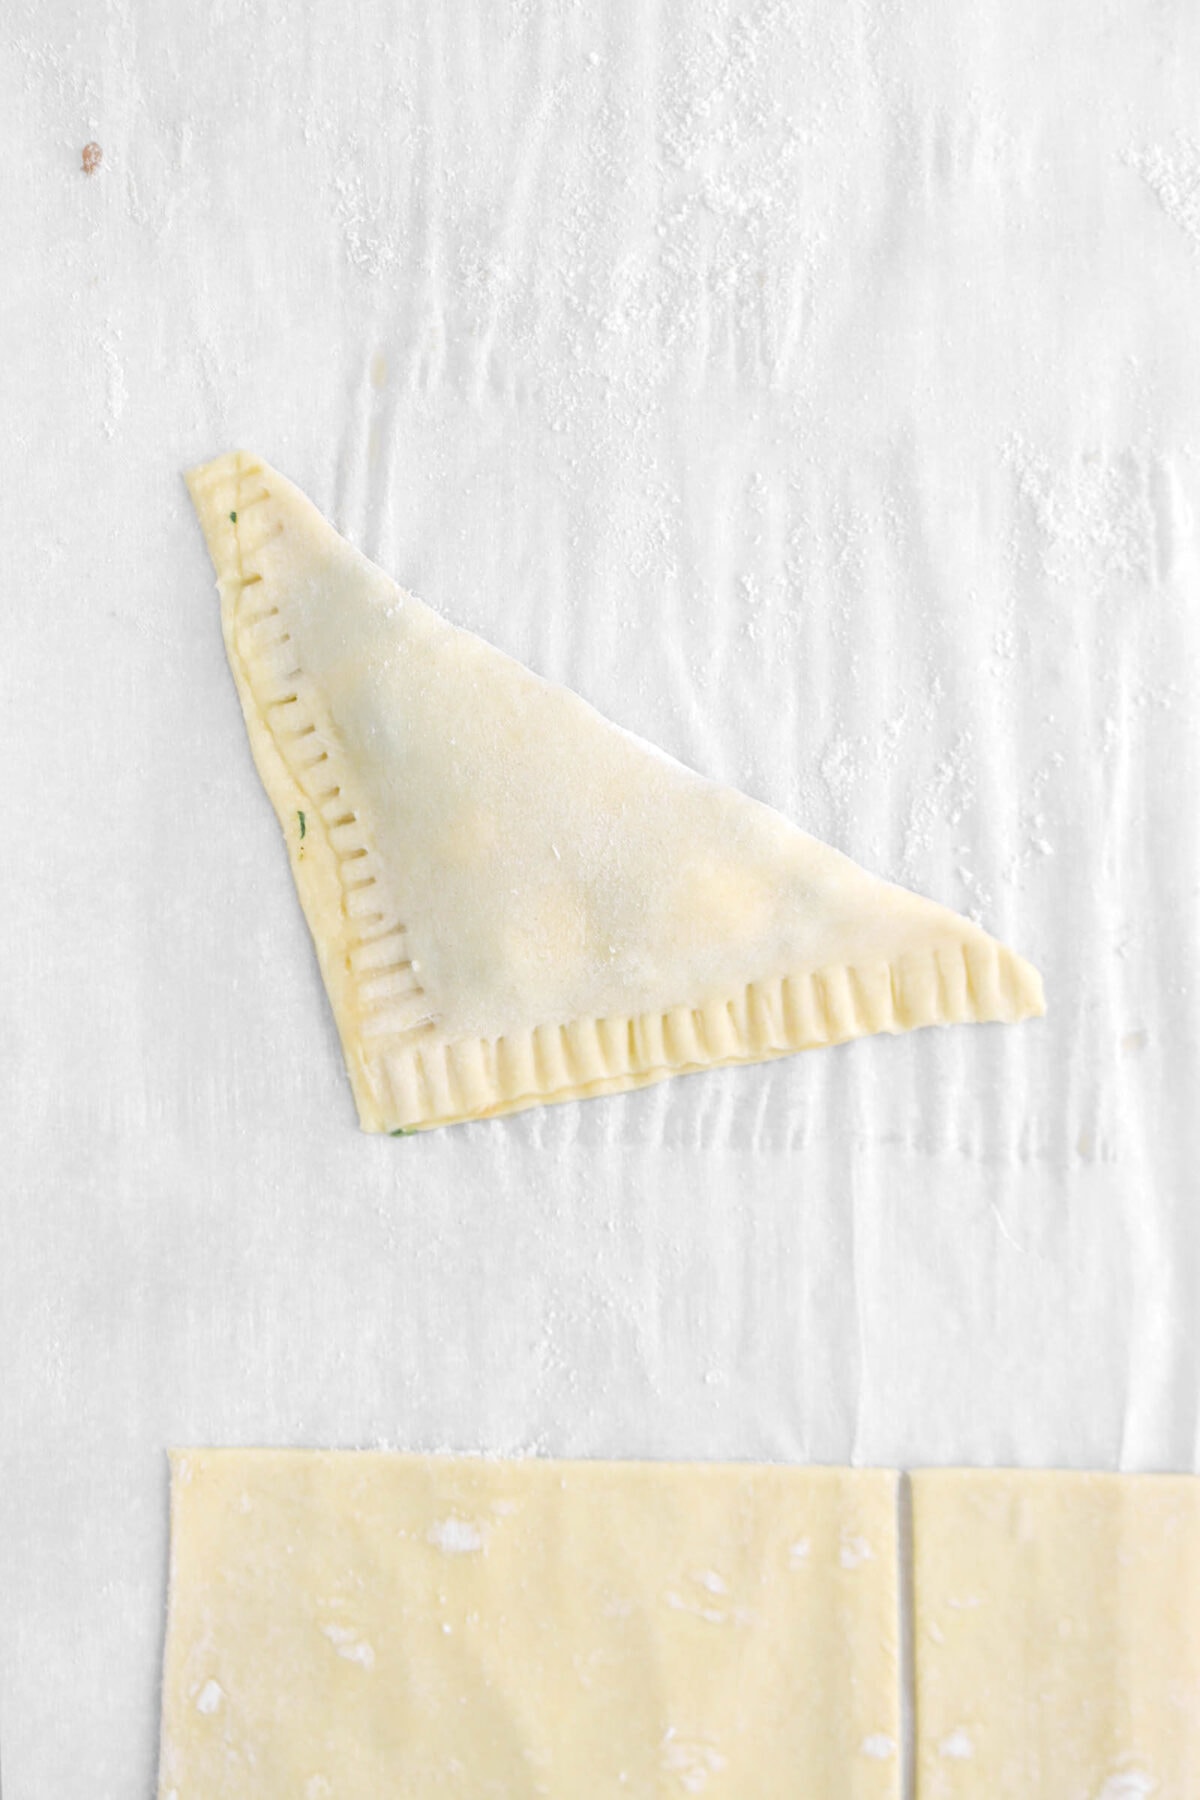 sealed turnover on parchment paper